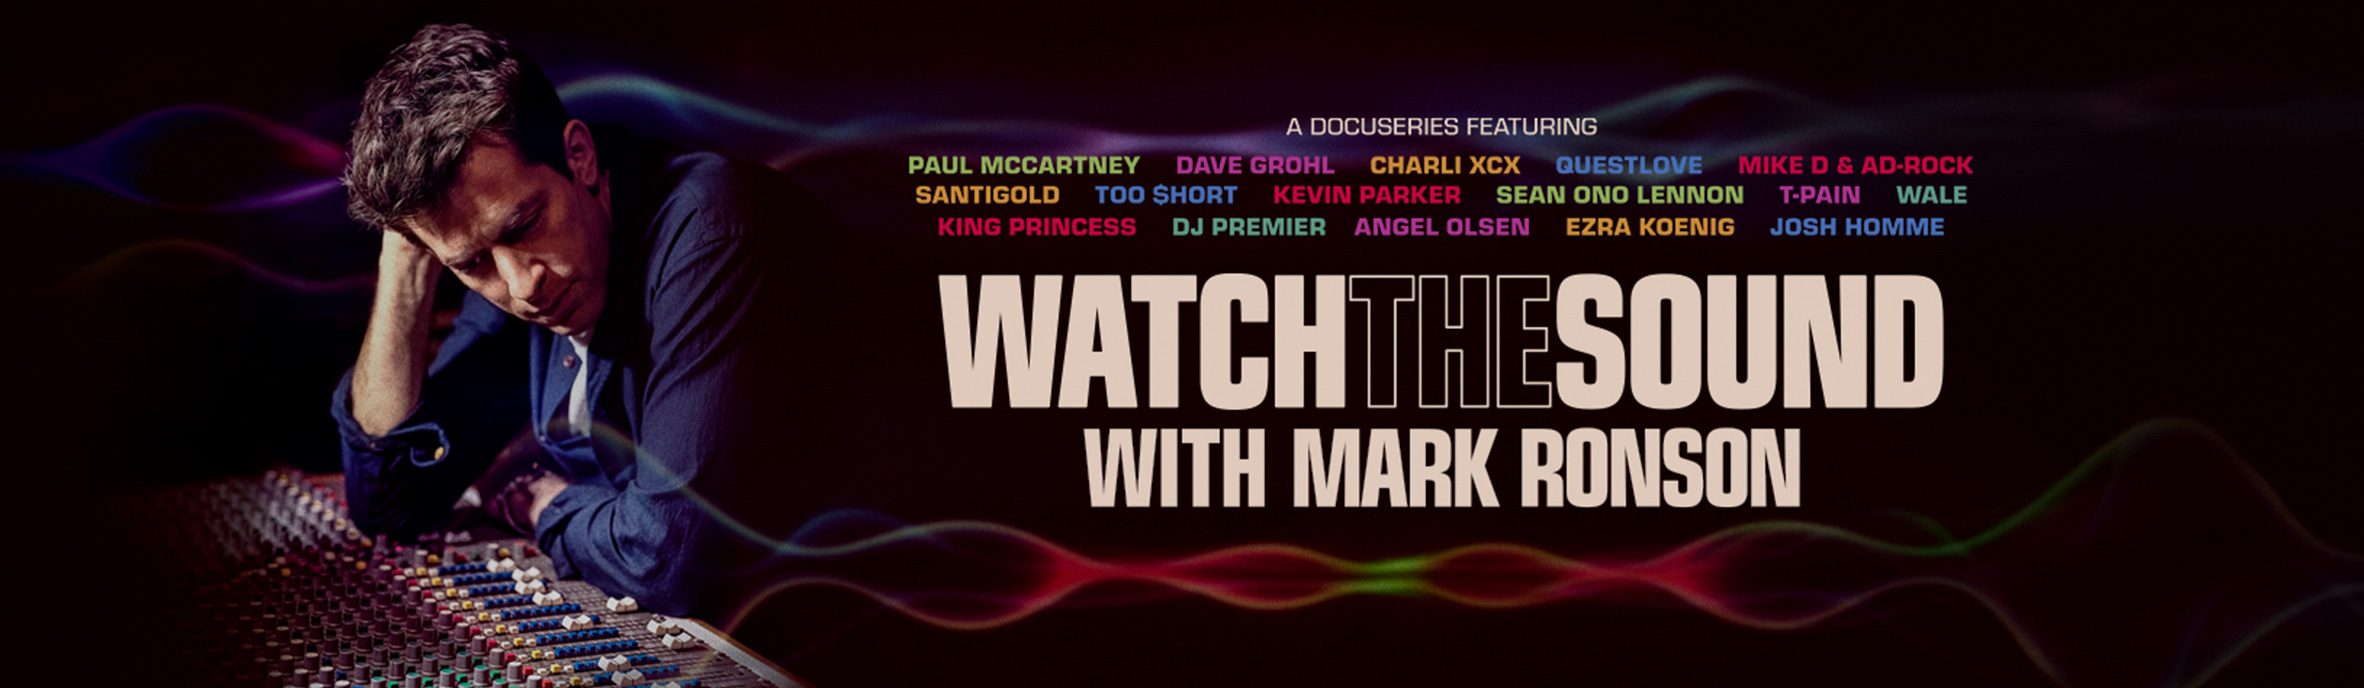 Watch the Sound with Mark Ronson - Apple TV+ Press